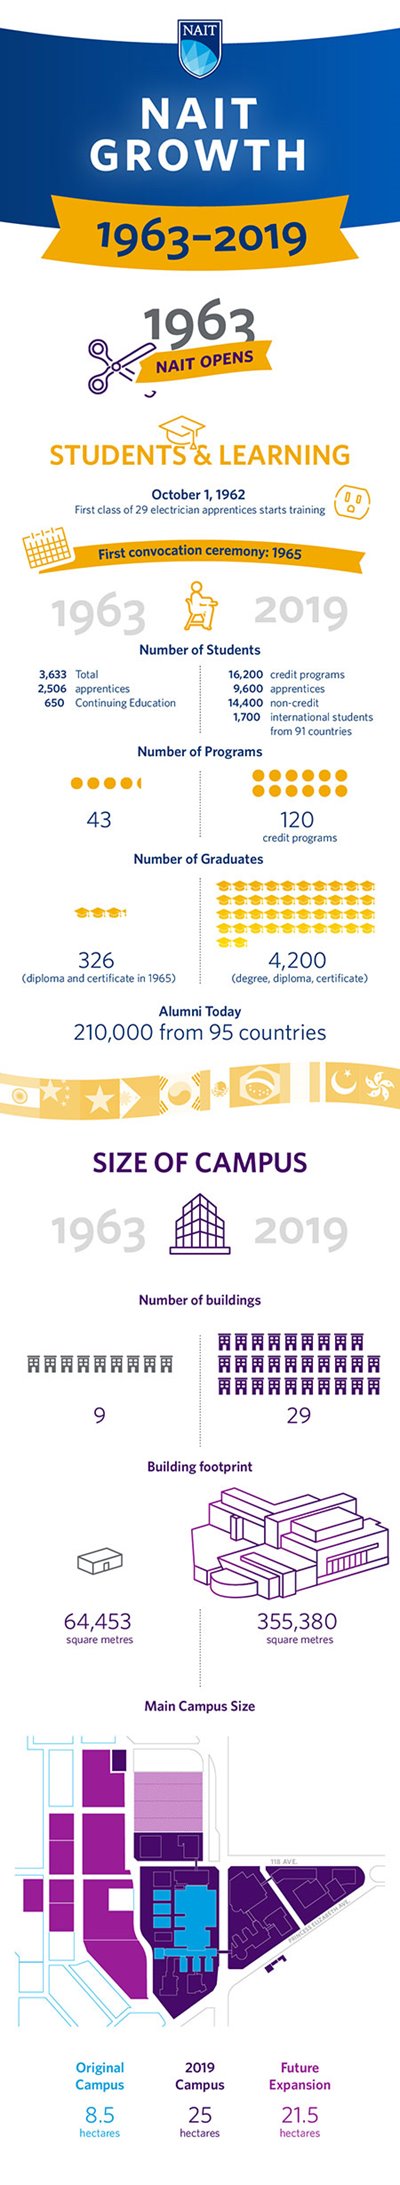 nait growth from opening to blatchford expansion, 1963 - 2019